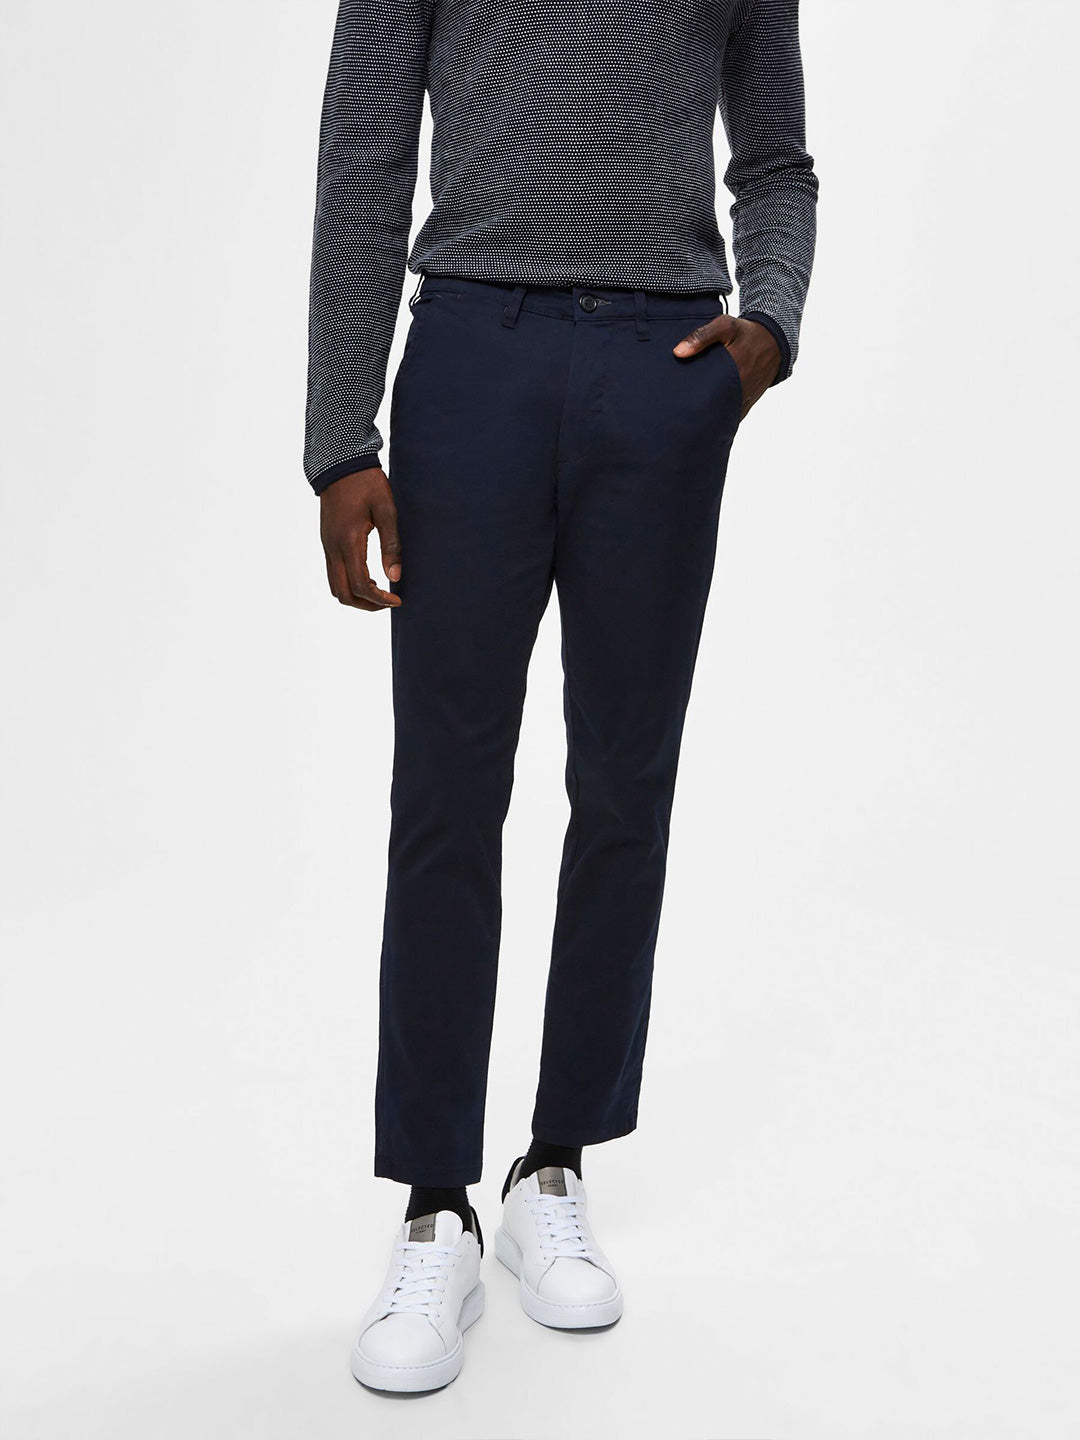 Selected blue chinos